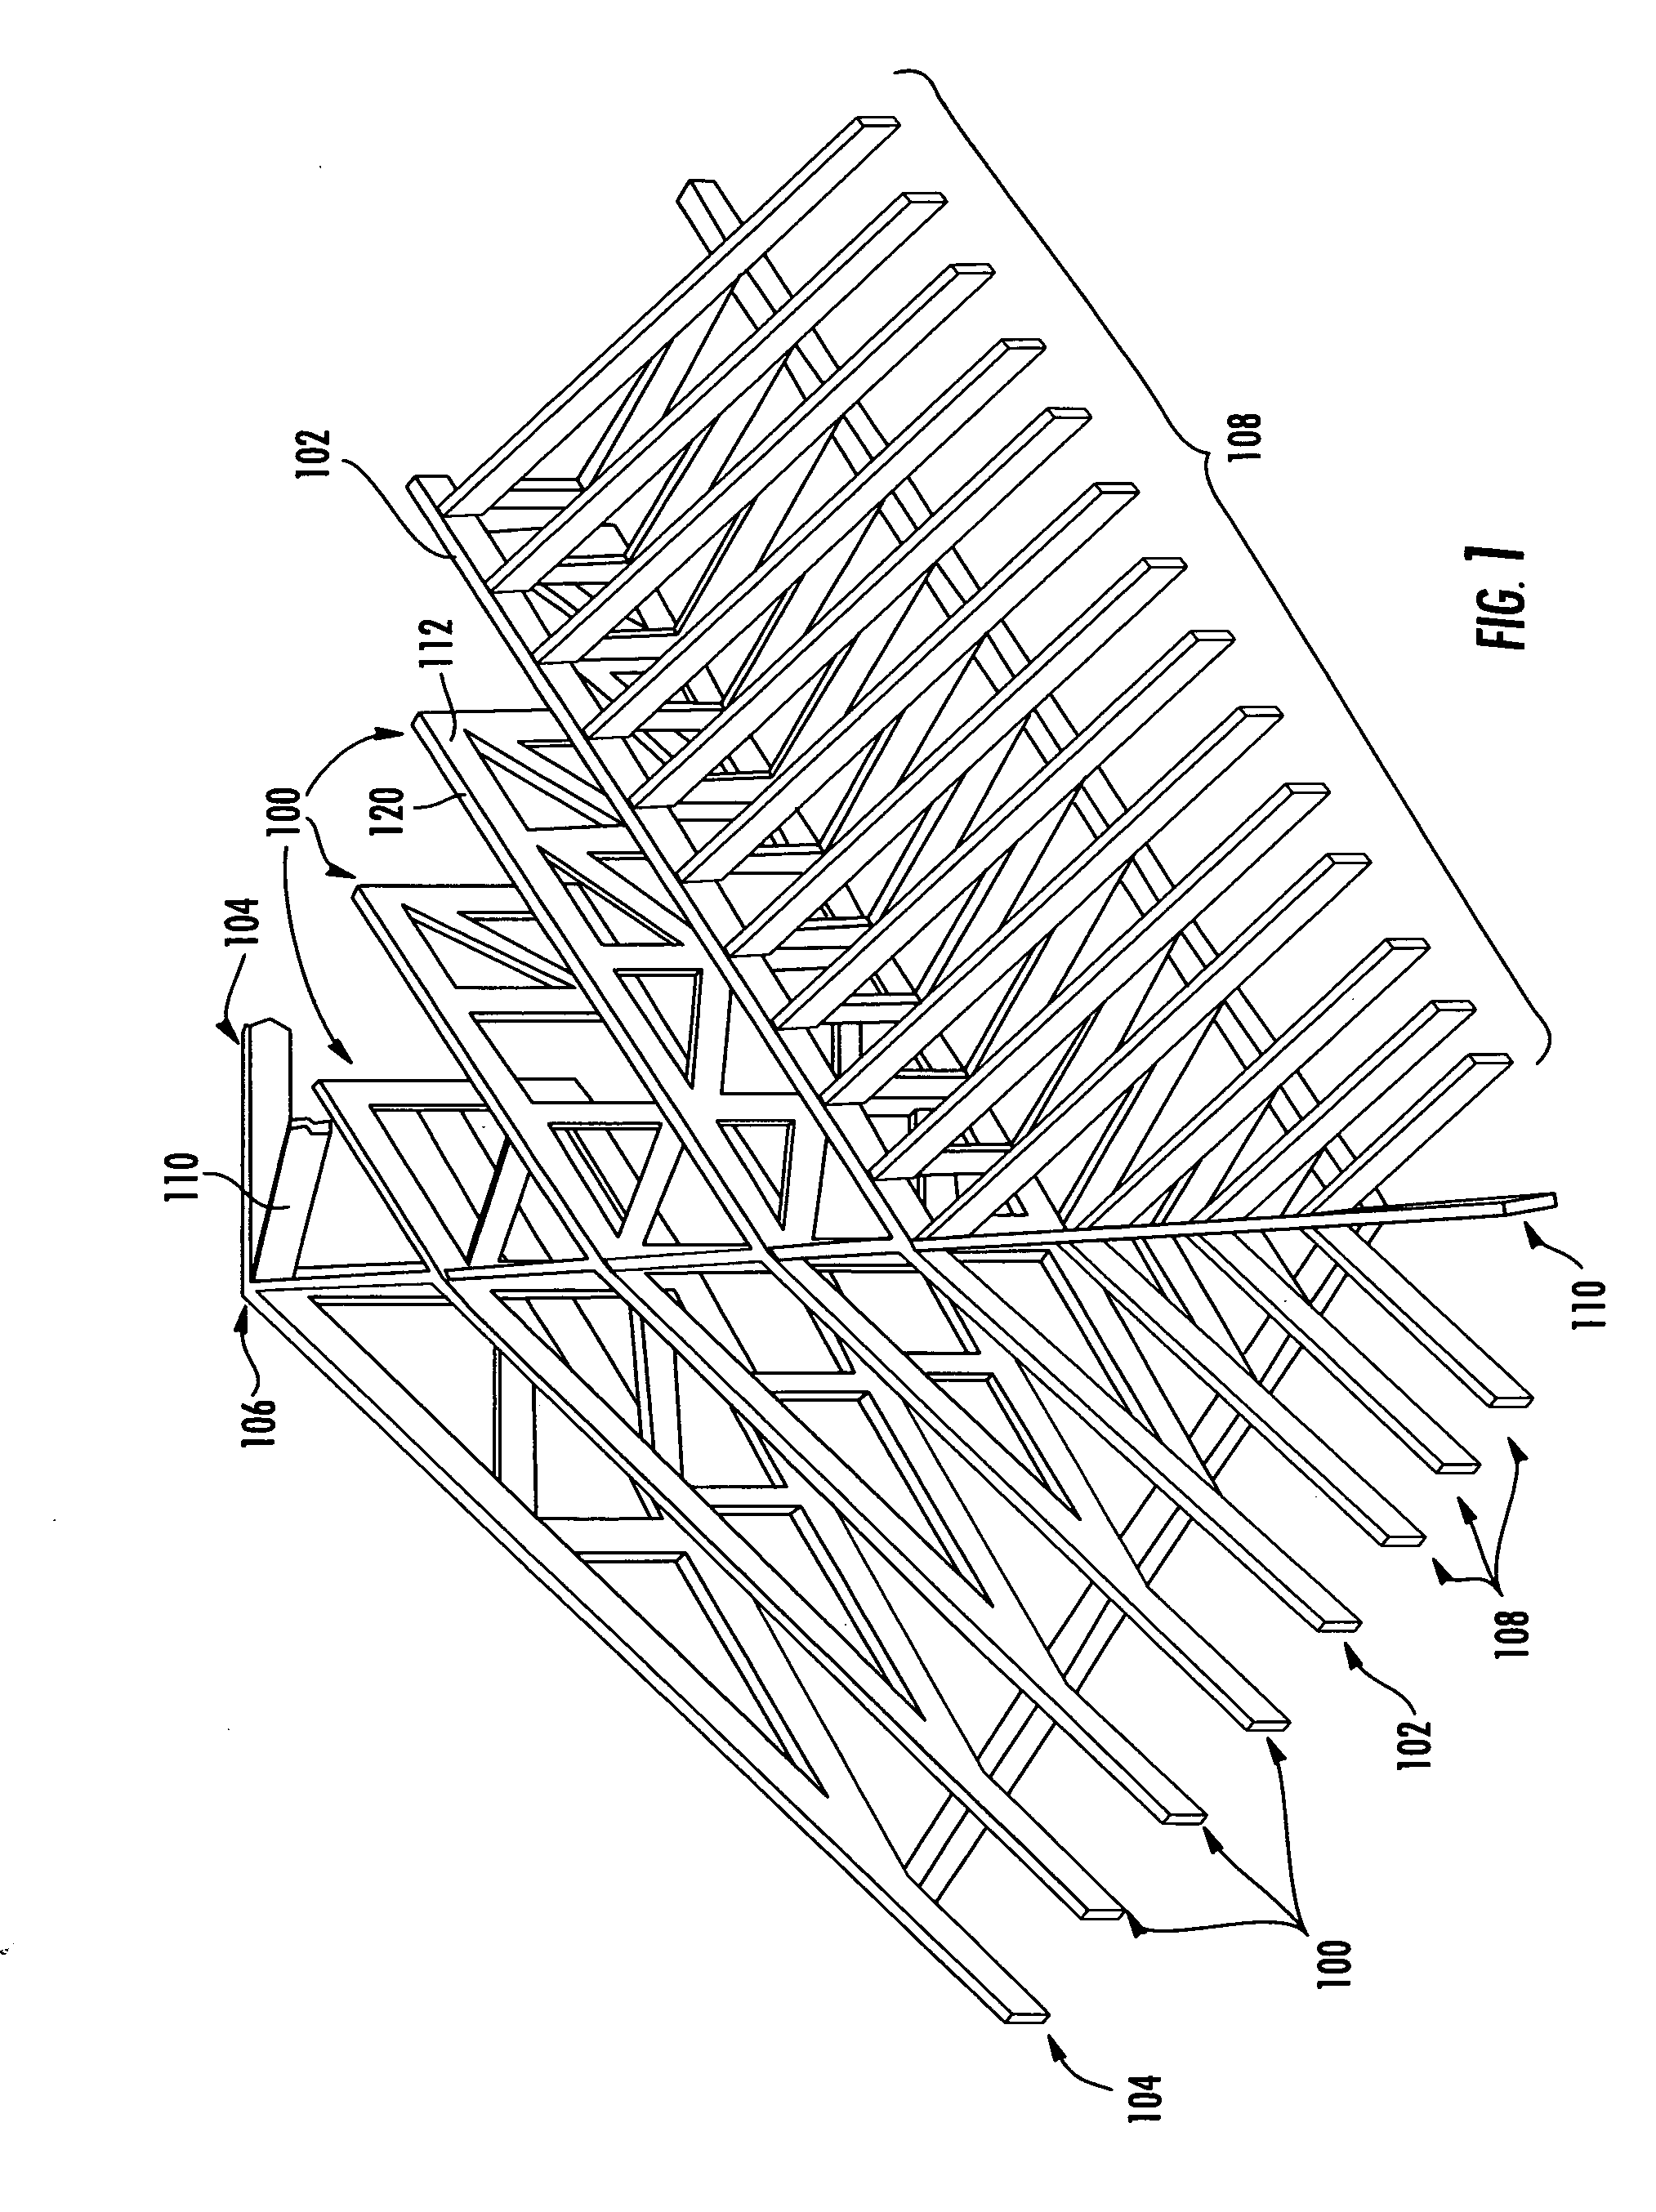 Bracing and spacing apparatus for hip trusses